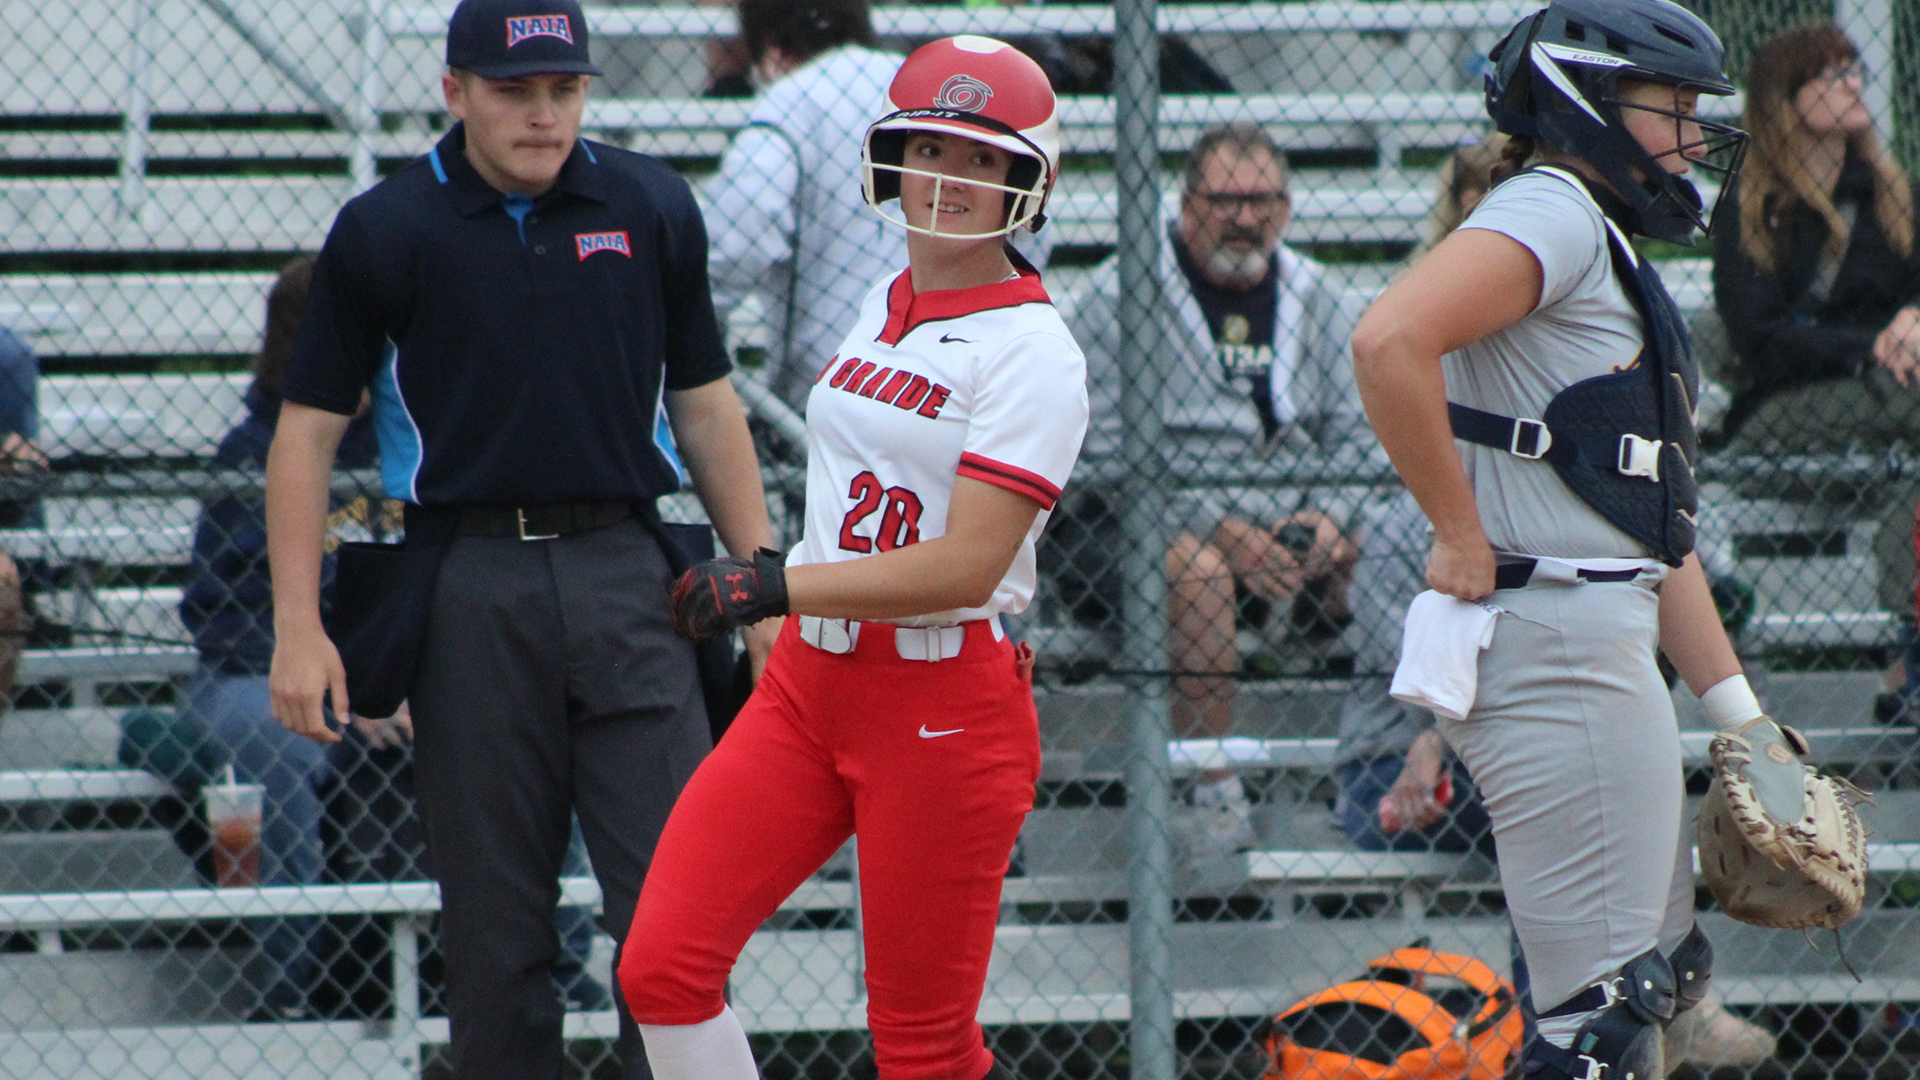 Caitlyn Brisker went 2-for-3 with a double, an RBI, and three runs in Rio Grande's 6-5 loss to Marian (Ind.).